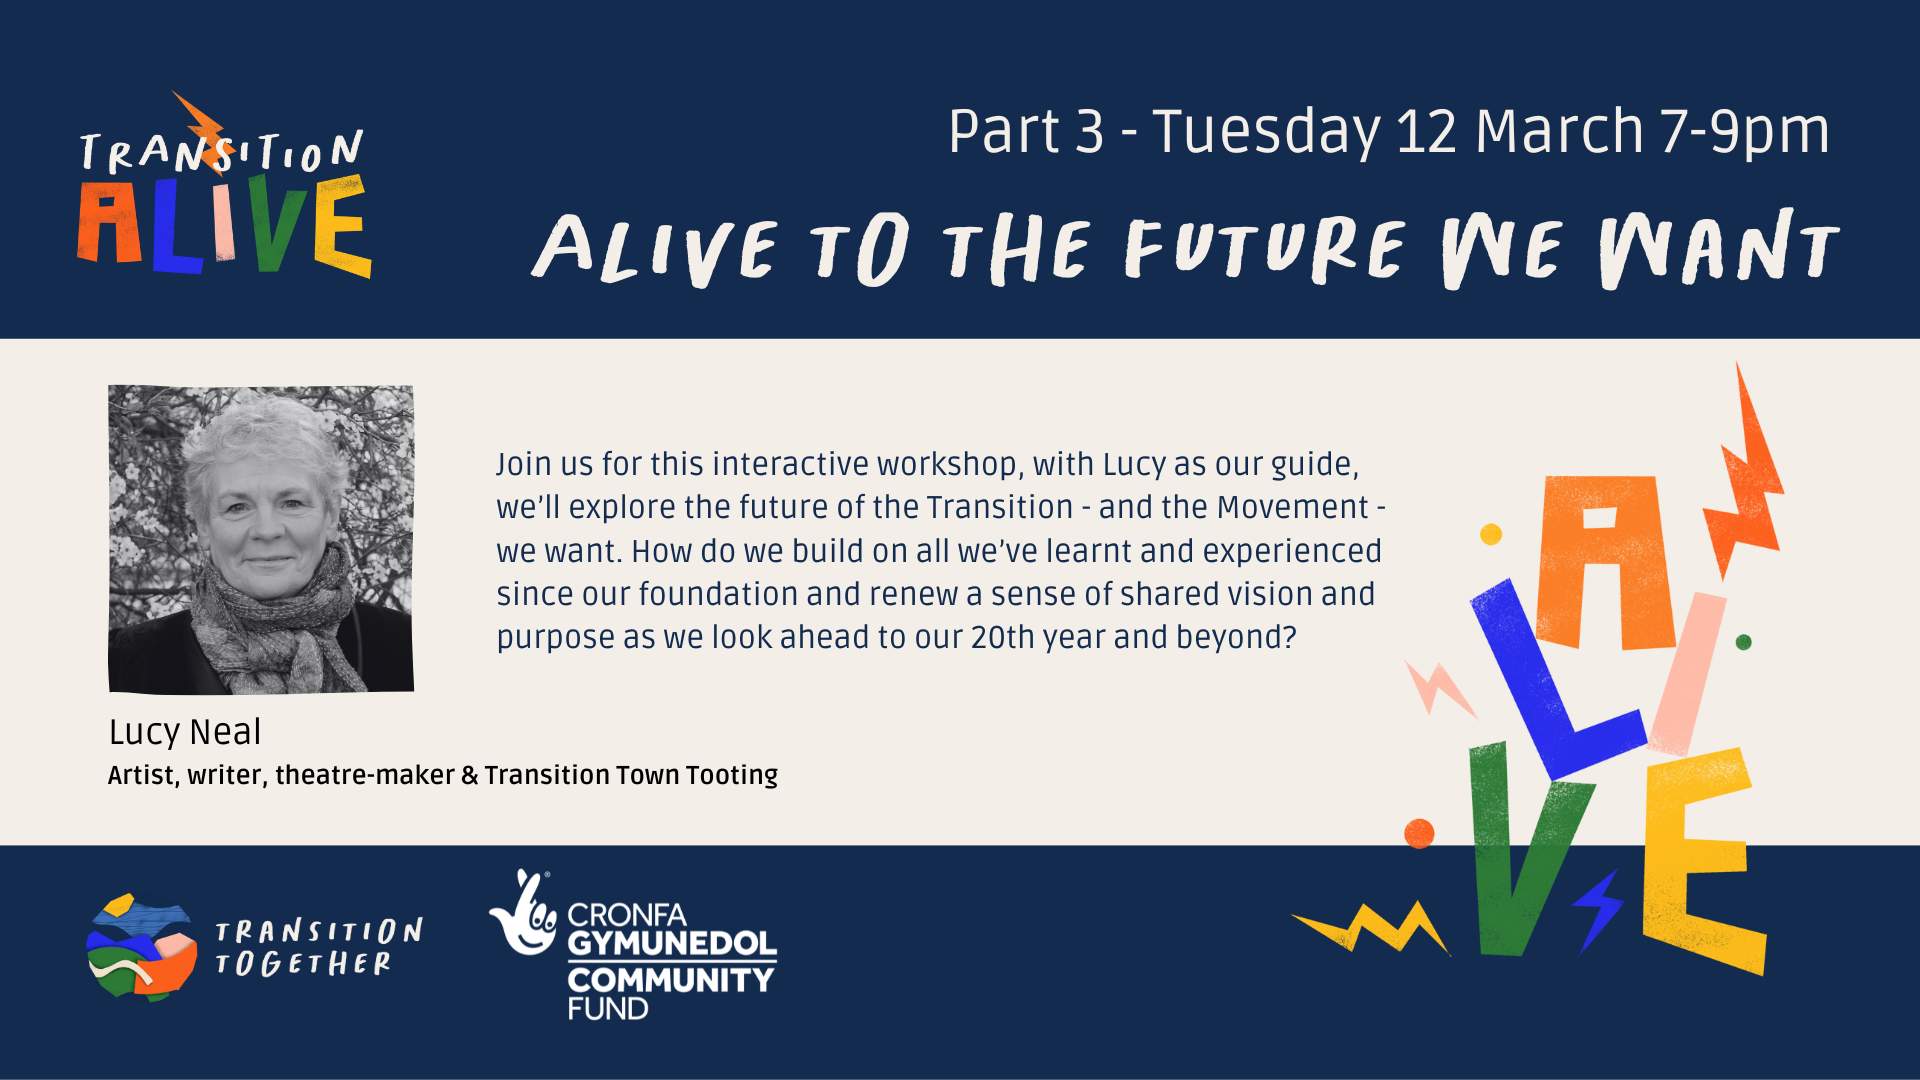 Transition Alive: Alive to the Transition we want